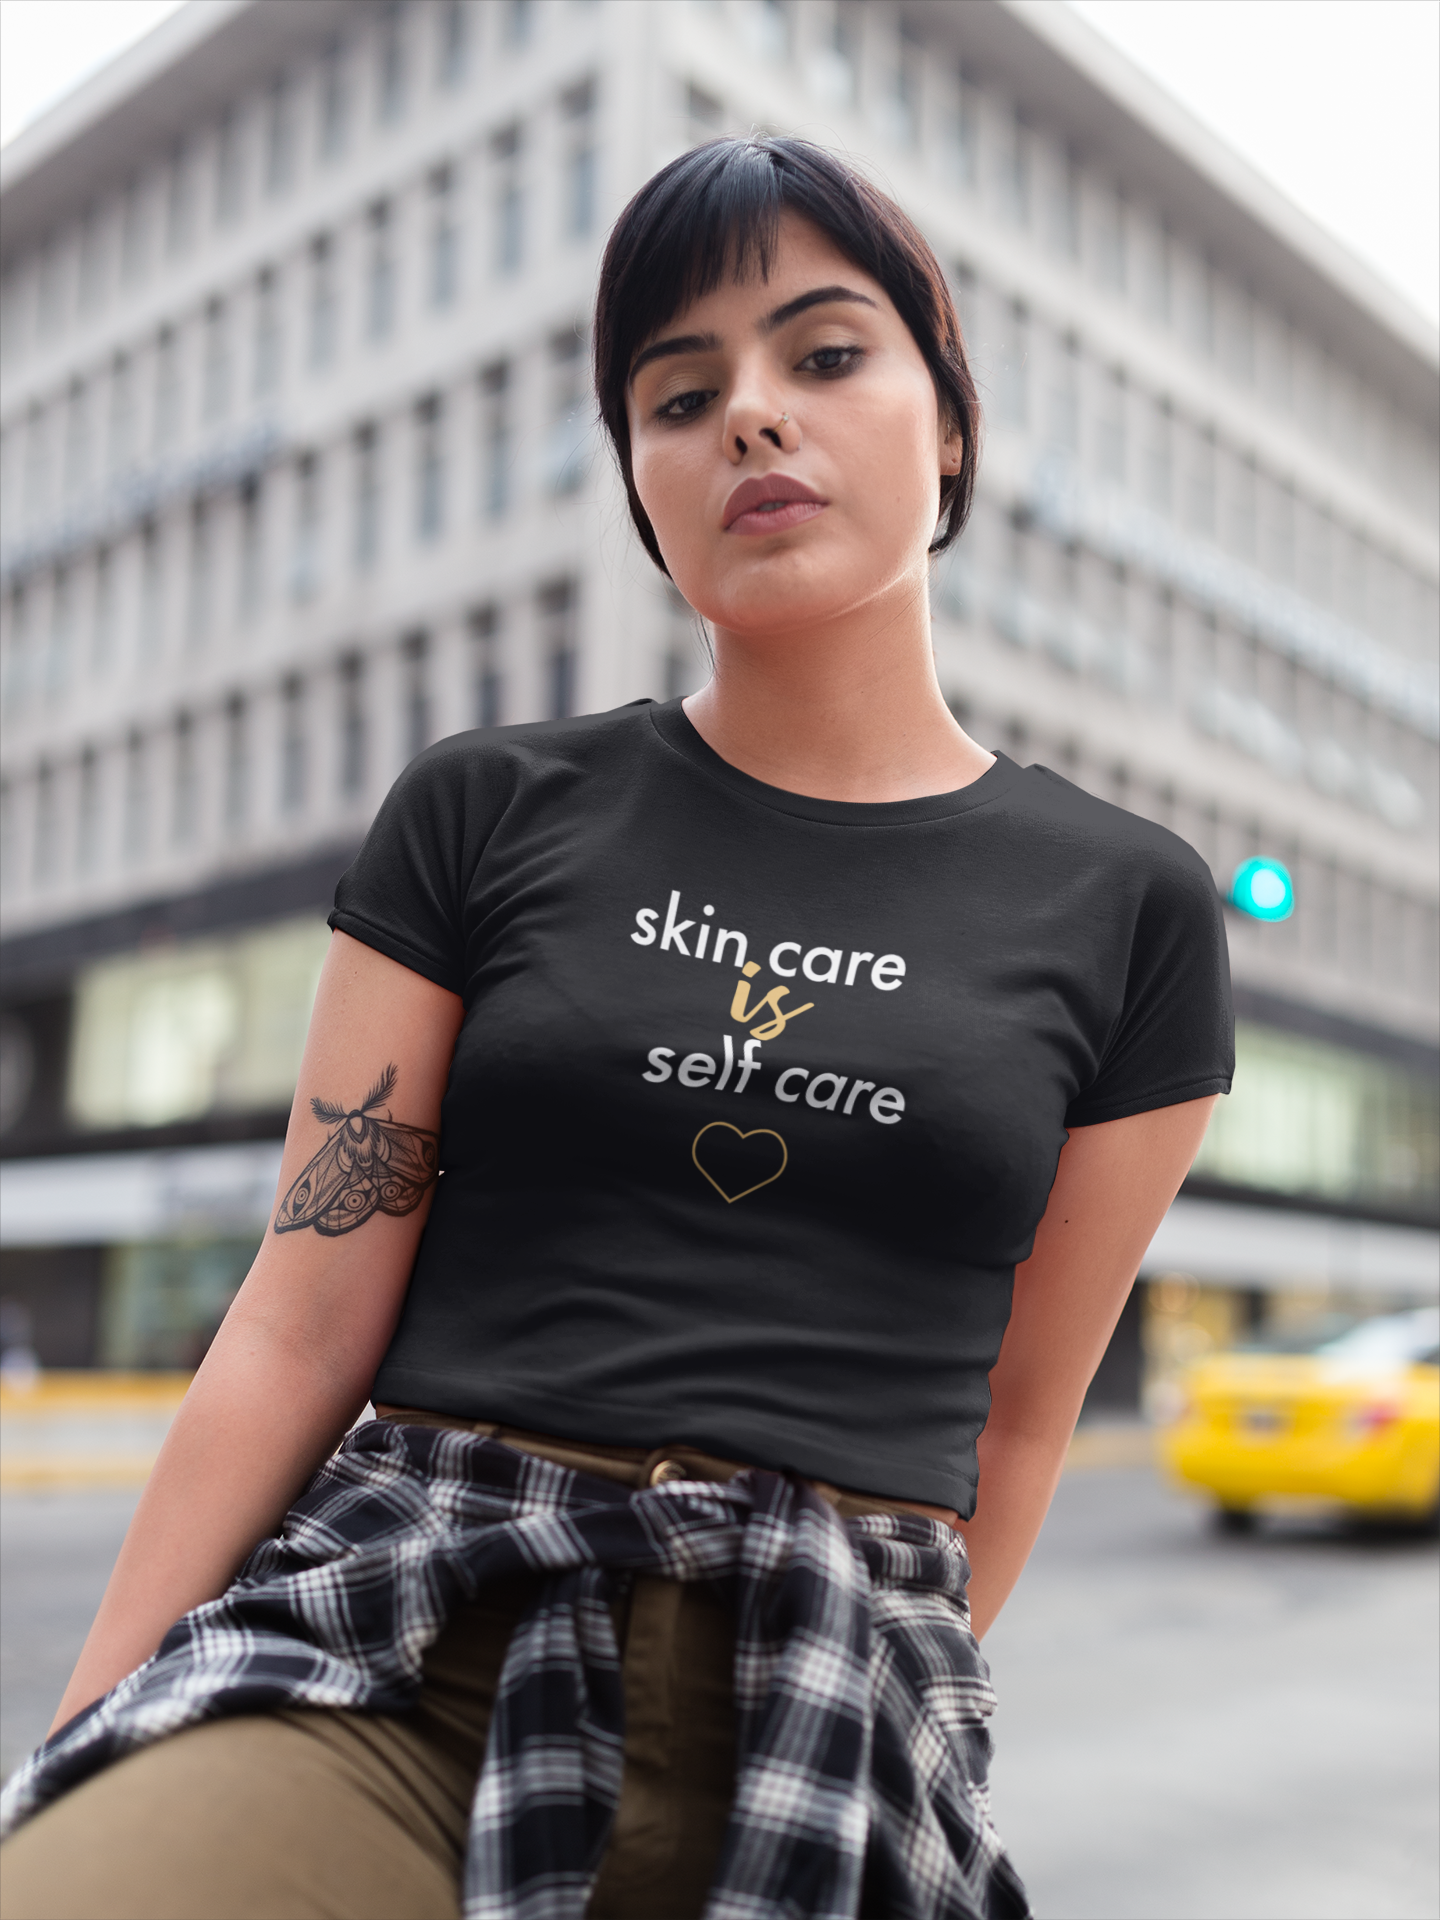 Skin Care Is Self Care Unisex t-shirt